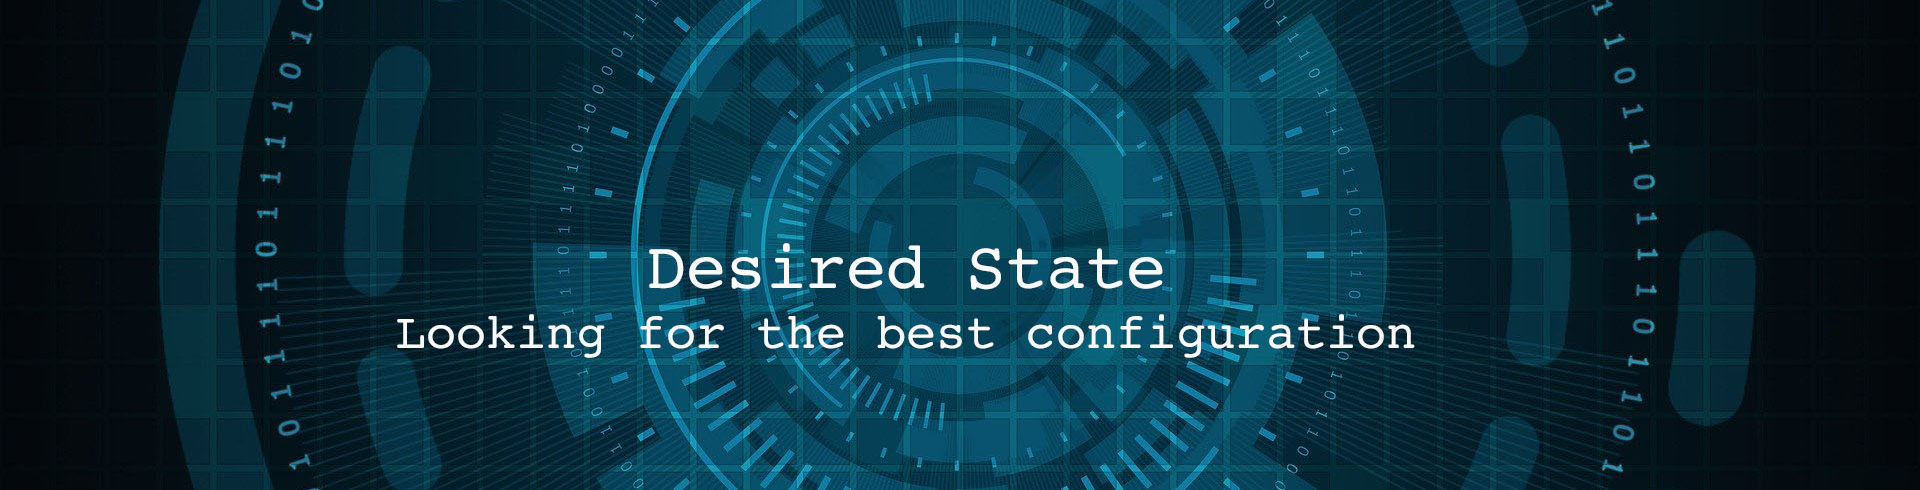 Desired State